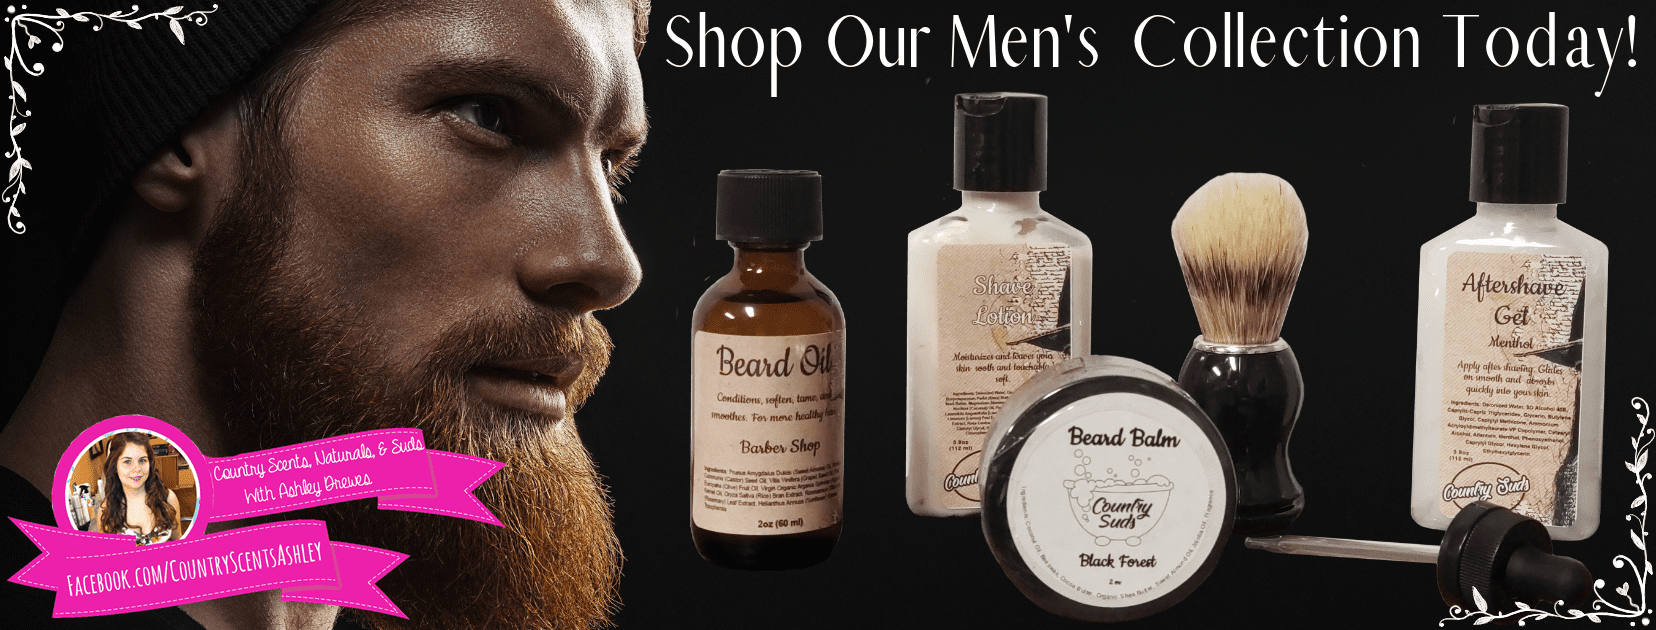 Men's Gift Idea: Country Suds.